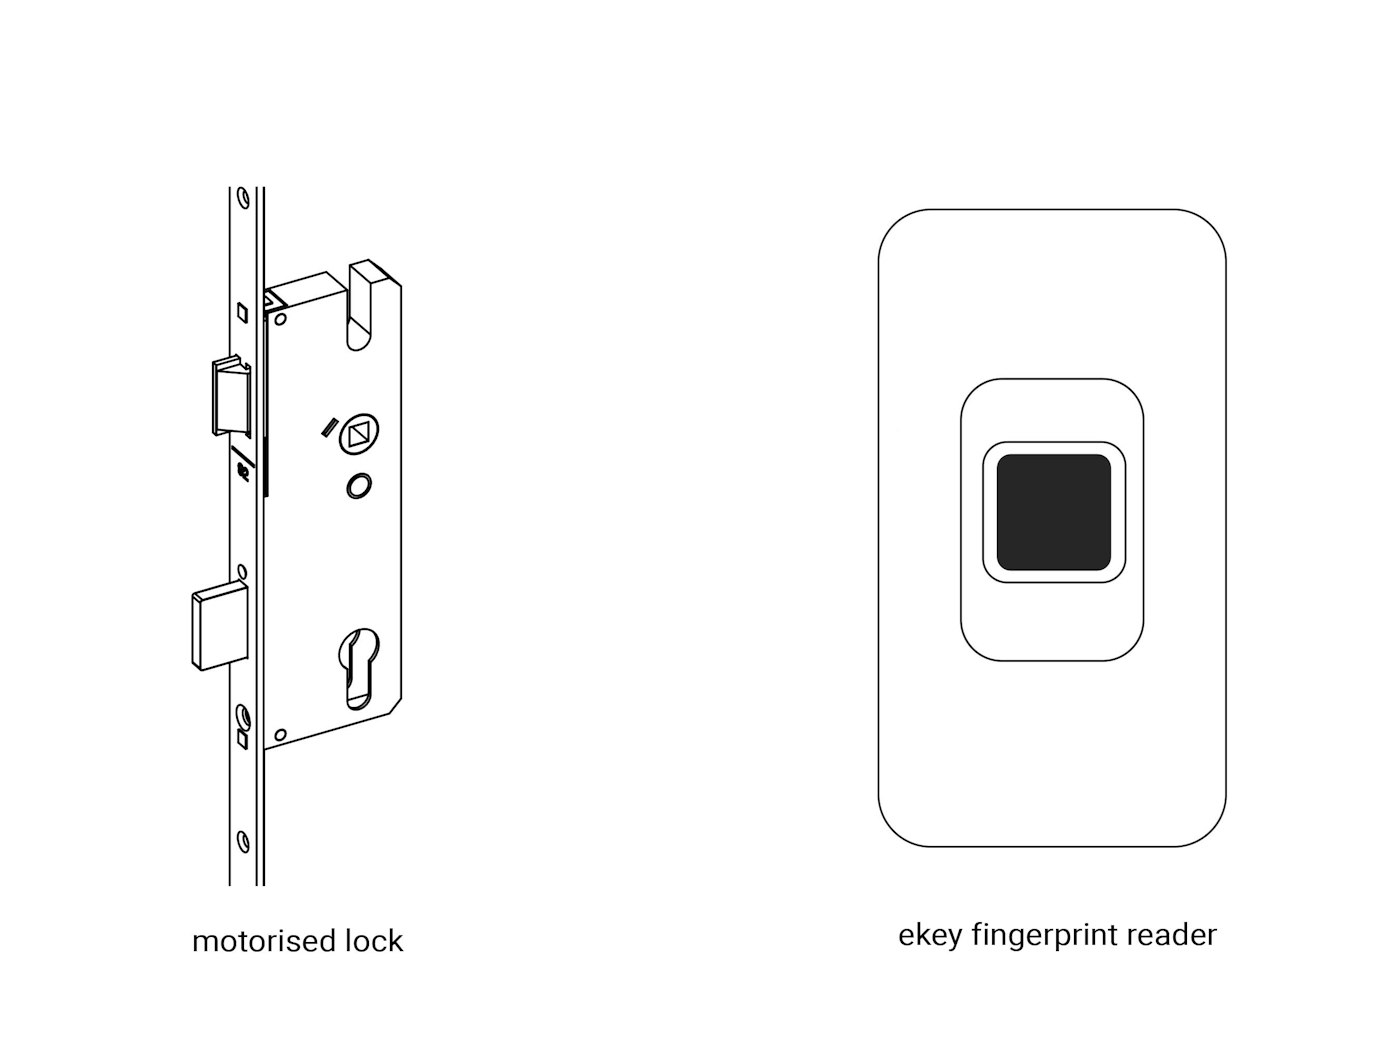 Your door needs motorised locking to be able to have our ekey fingerprint or another keyless entry system